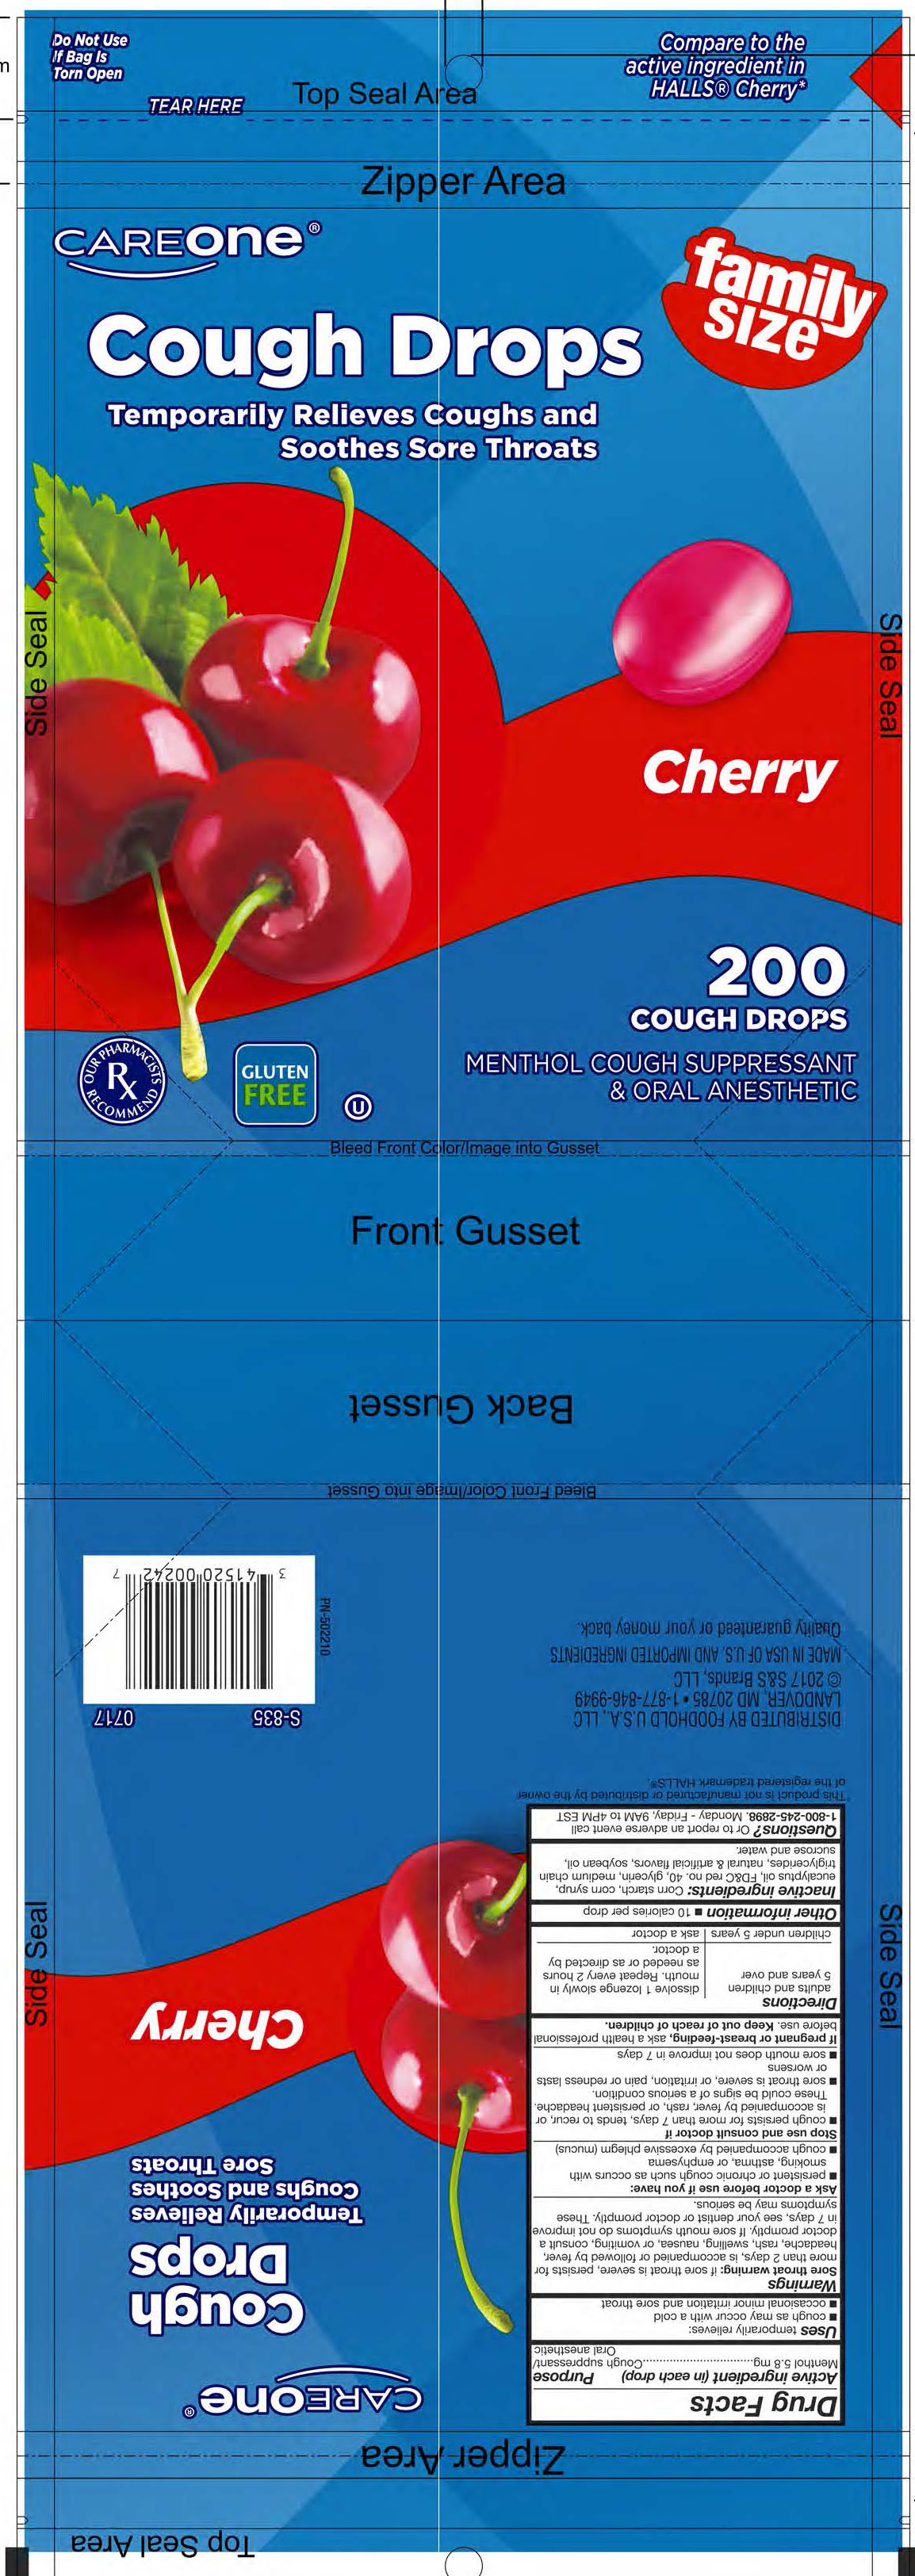 CareOne Cherry 200ct Cough Drops